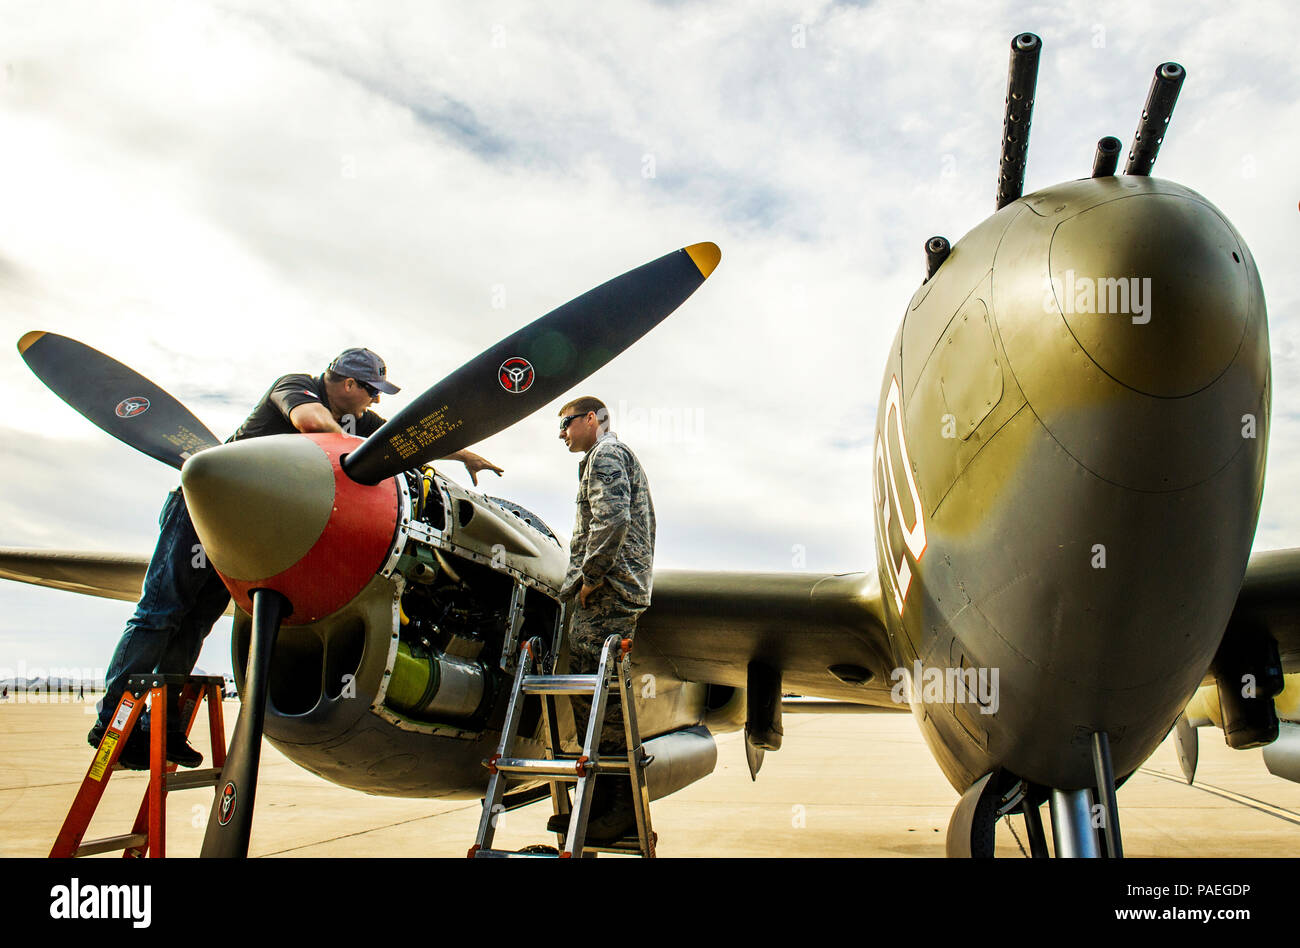 Senior Airman Anthony Naugle, right, an A-10 crew chief with the 357th Fighter Squadron, 355th Fighter Group based at Davis-Monthan AFB, Tucson, Ariz., gets a lesson in the maintenance of one of the two 1,000 hp (746 kW), turbo-supercharged, 12-cylinder Allison V-1710 engines on a P-38 Lightning from Doug Abshier after the day's practice flights at the Heritage Flight Training Course, Mar 5, 2016. (U.S. Air Force photo by J.M. Eddins Jr.) Stock Photo